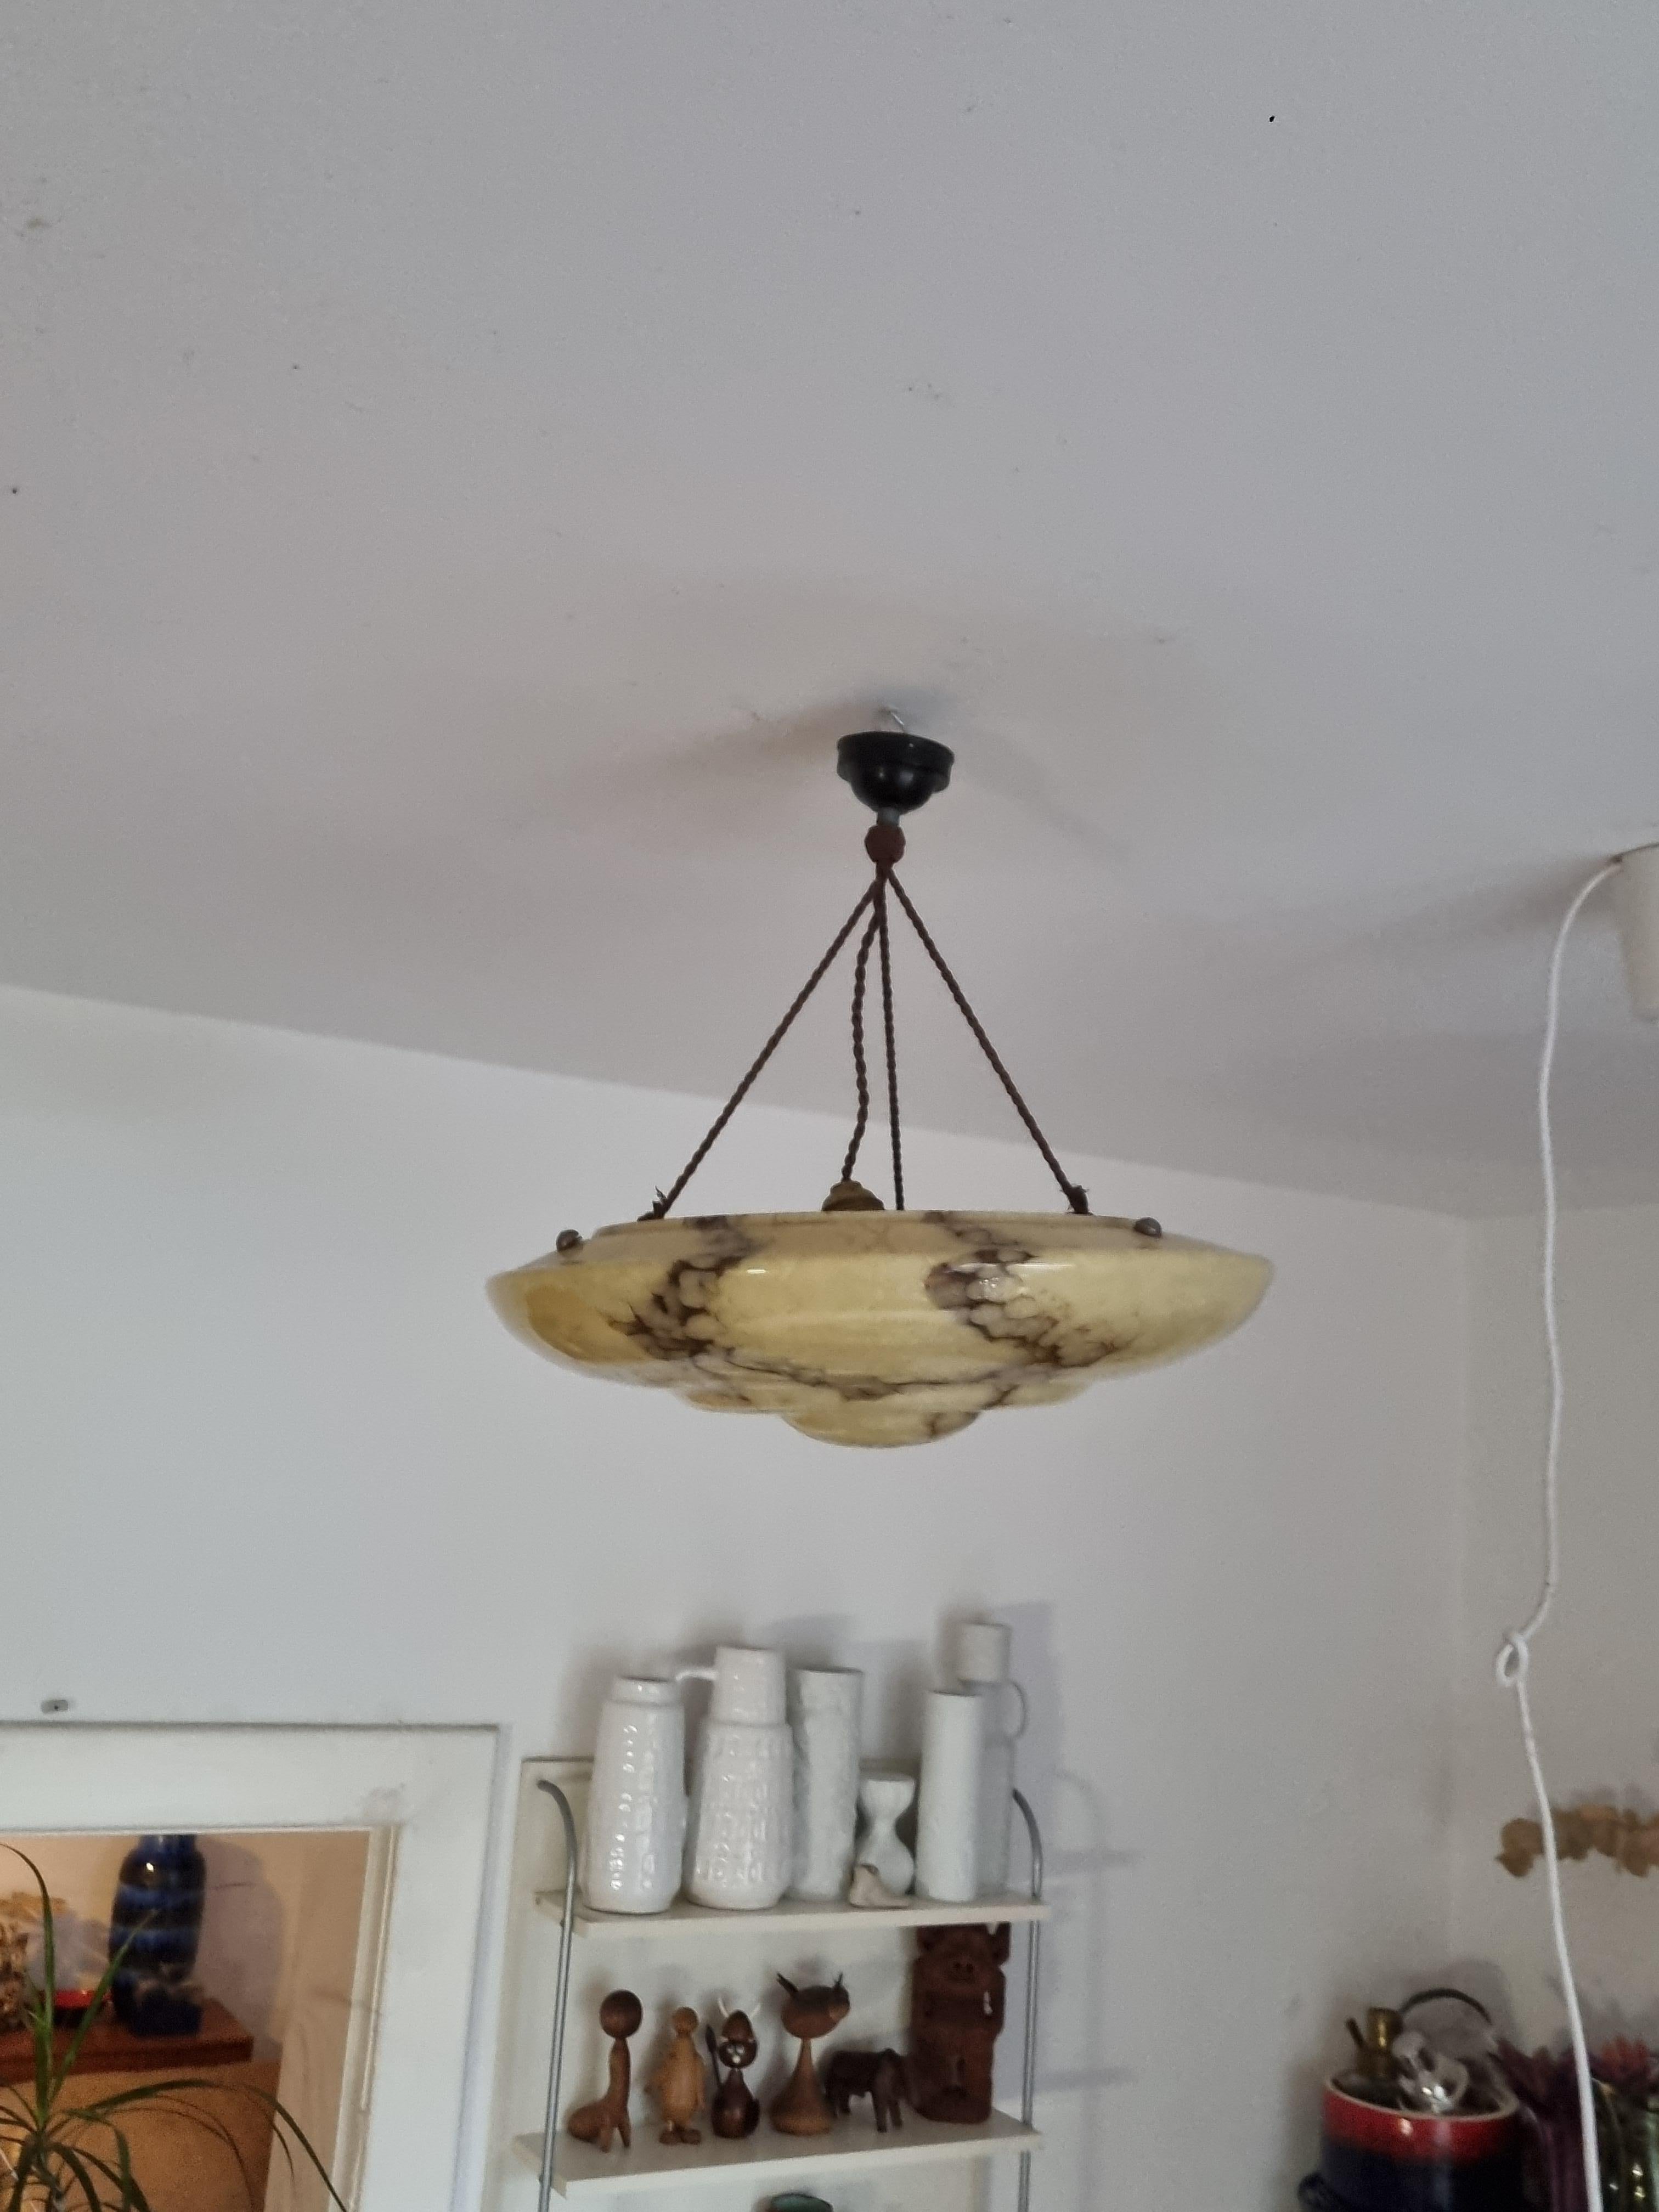 The lamp is an extreme good condition. Nothing has been changed, it is in it's original state and works (shines) perfectly. Hand carved, antique alabaster chandelier. This chandelier is white and black from top to bottom and the thunderstroke-like